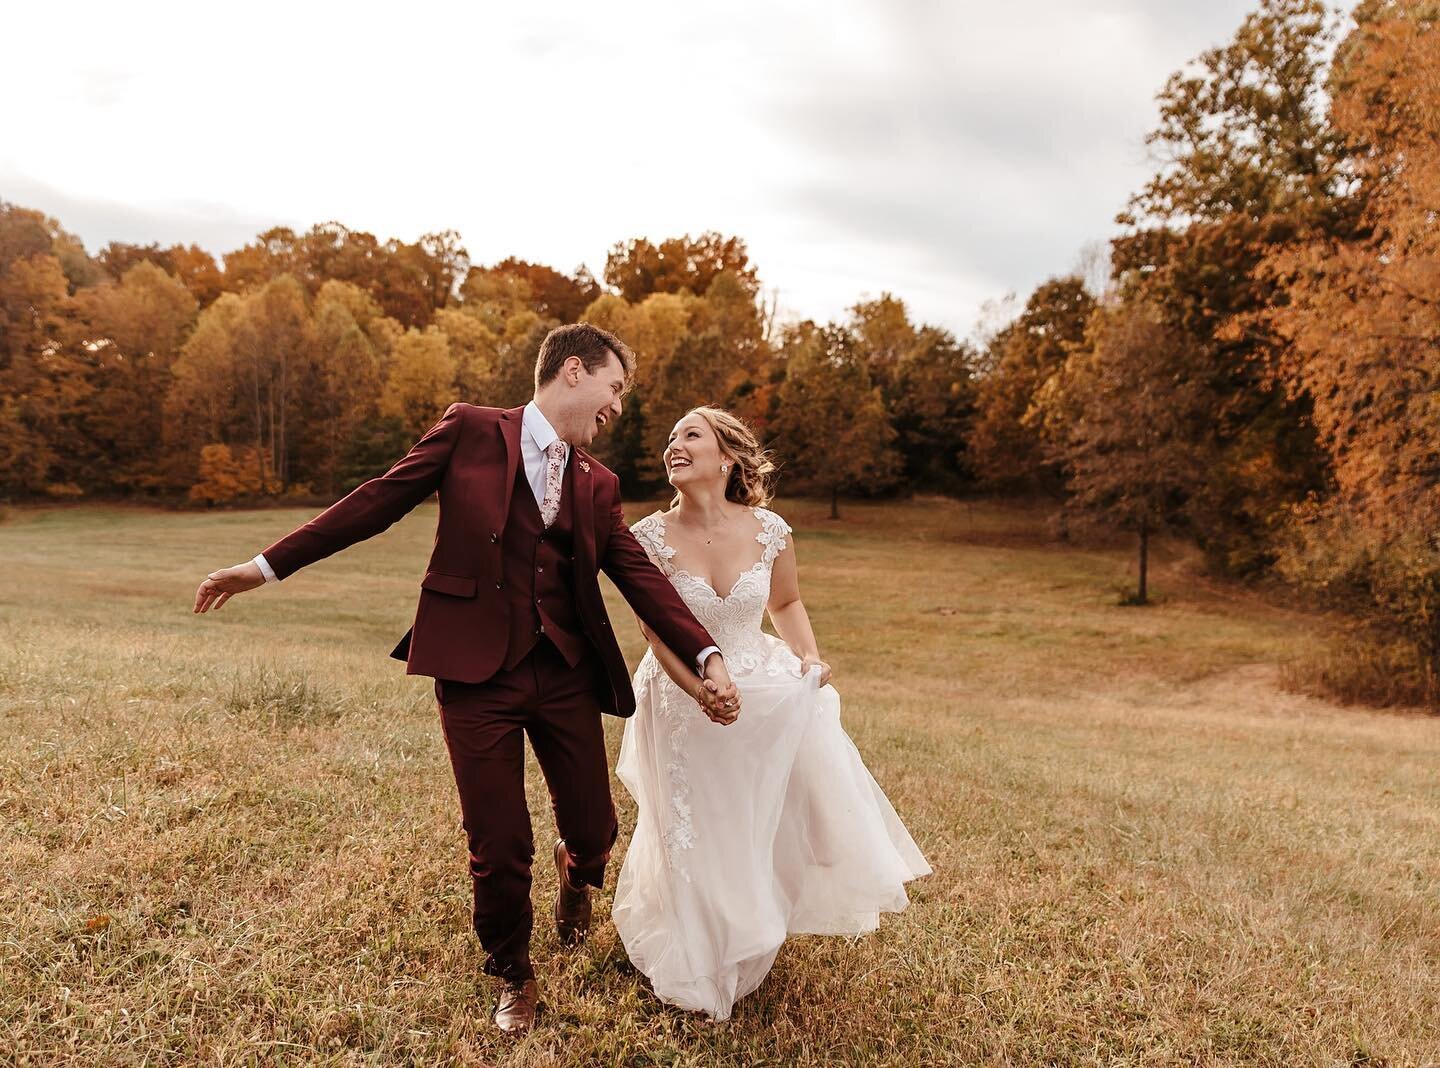 Crazy for you

Officiant- Jillian Patterson
Catering- Fistful of Tacos
Bakery- Elsie Mae's Canning &amp; Pies
Invitation- Zola
Gown- Ivory Rose Bridal Boutique
Suits- Ivory Rose Bridal Boutique
DJ- Spectrum Sound 
Coordinator- Beth Goins
HMUA- Meraki